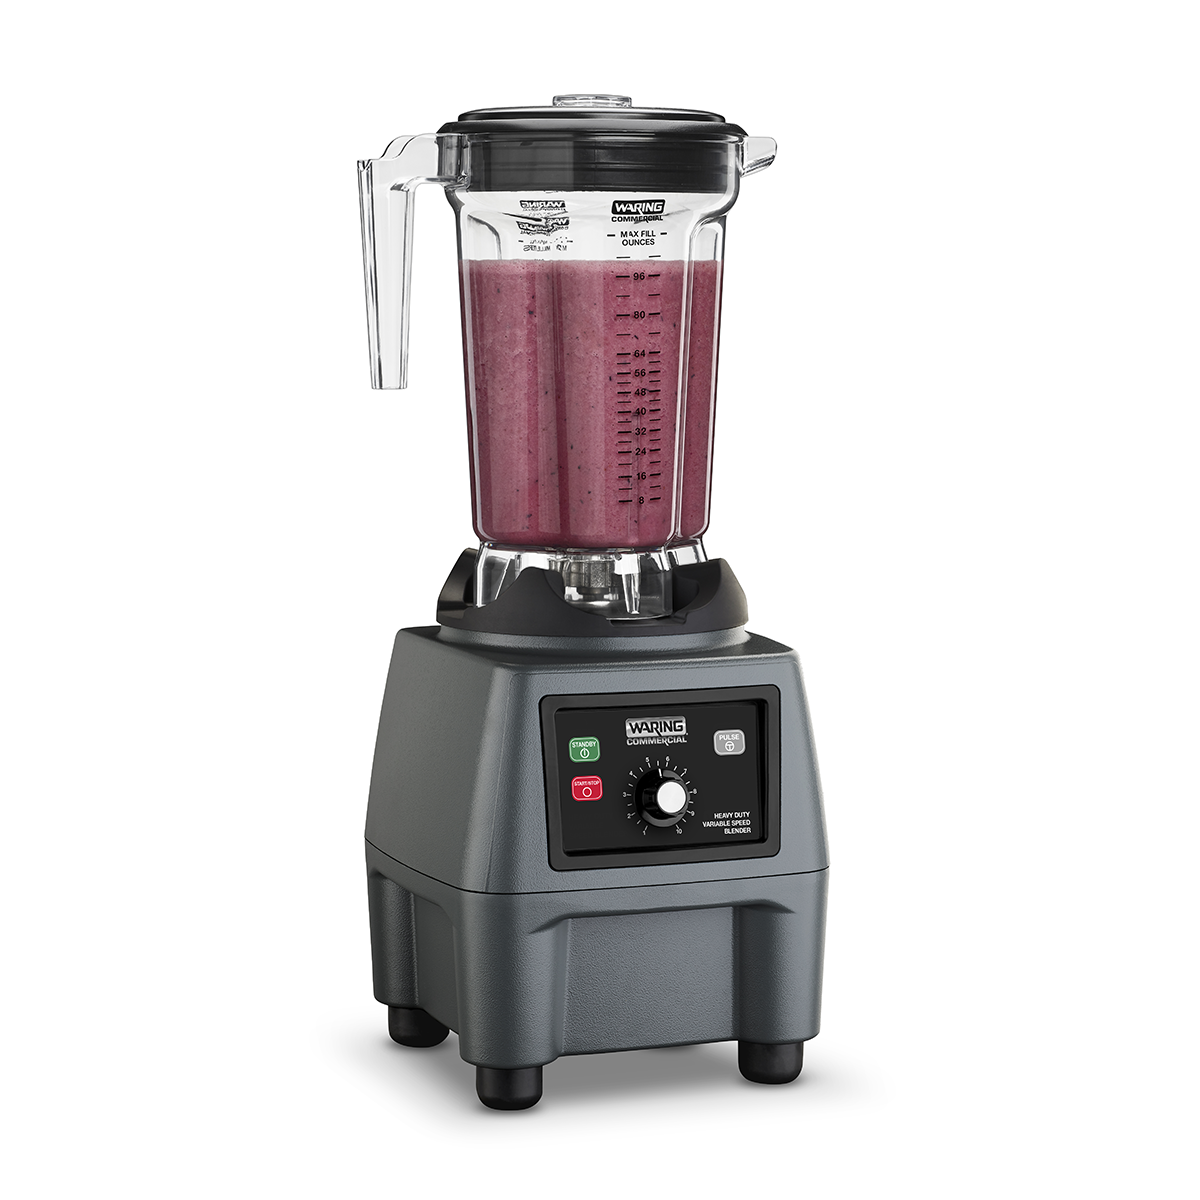 CB15VP Heavy-Duty One Gallon Variable Speed Food Blender with Copolyester Jar by Waring Commercial